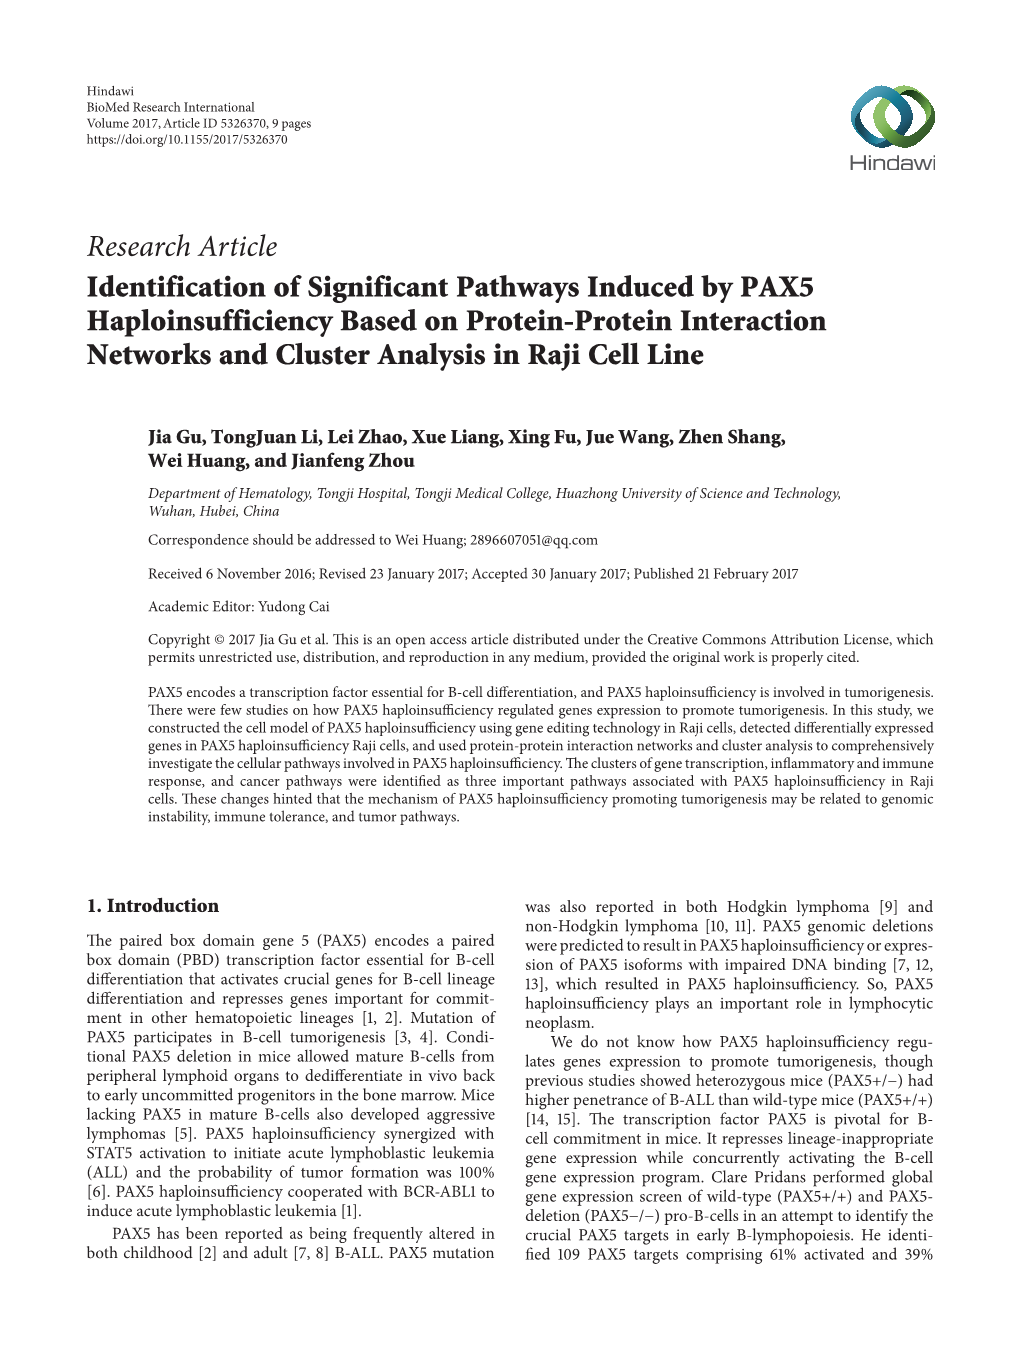 Identification of Significant Pathways Induced by PAX5 Haploinsufficiency Based on Protein-Protein Interaction Networks and Cluster Analysis in Raji Cell Line